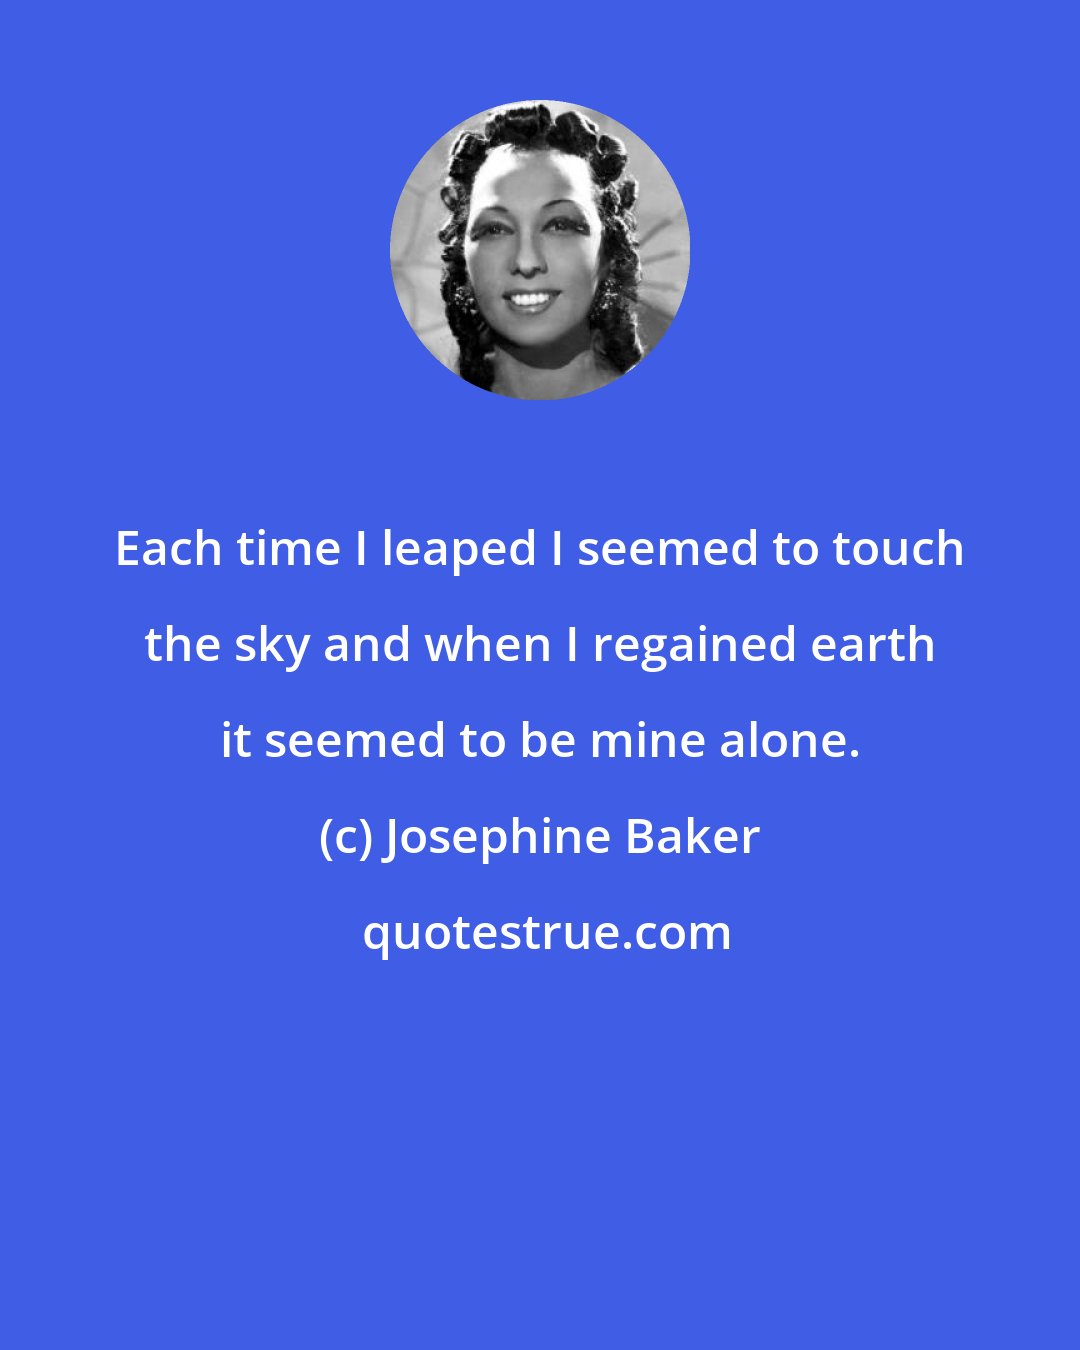 Josephine Baker: Each time I leaped I seemed to touch the sky and when I regained earth it seemed to be mine alone.